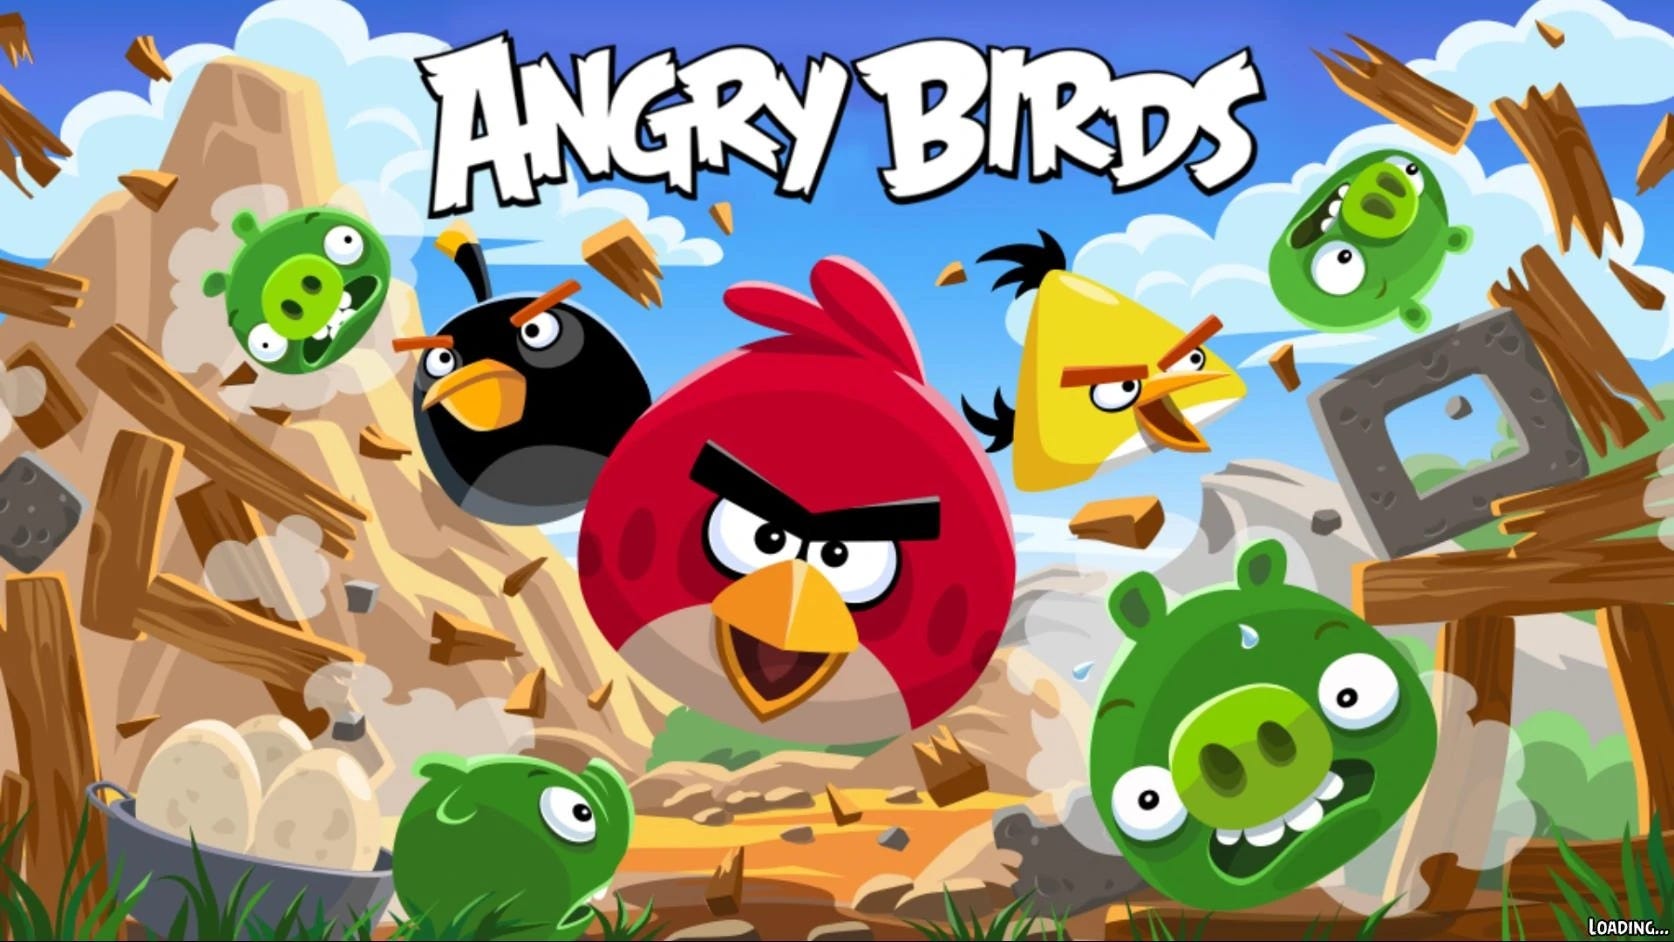 Angry Birds Theme Song Monday Music Mayhem July 22 19 By Martin V The Critical Index